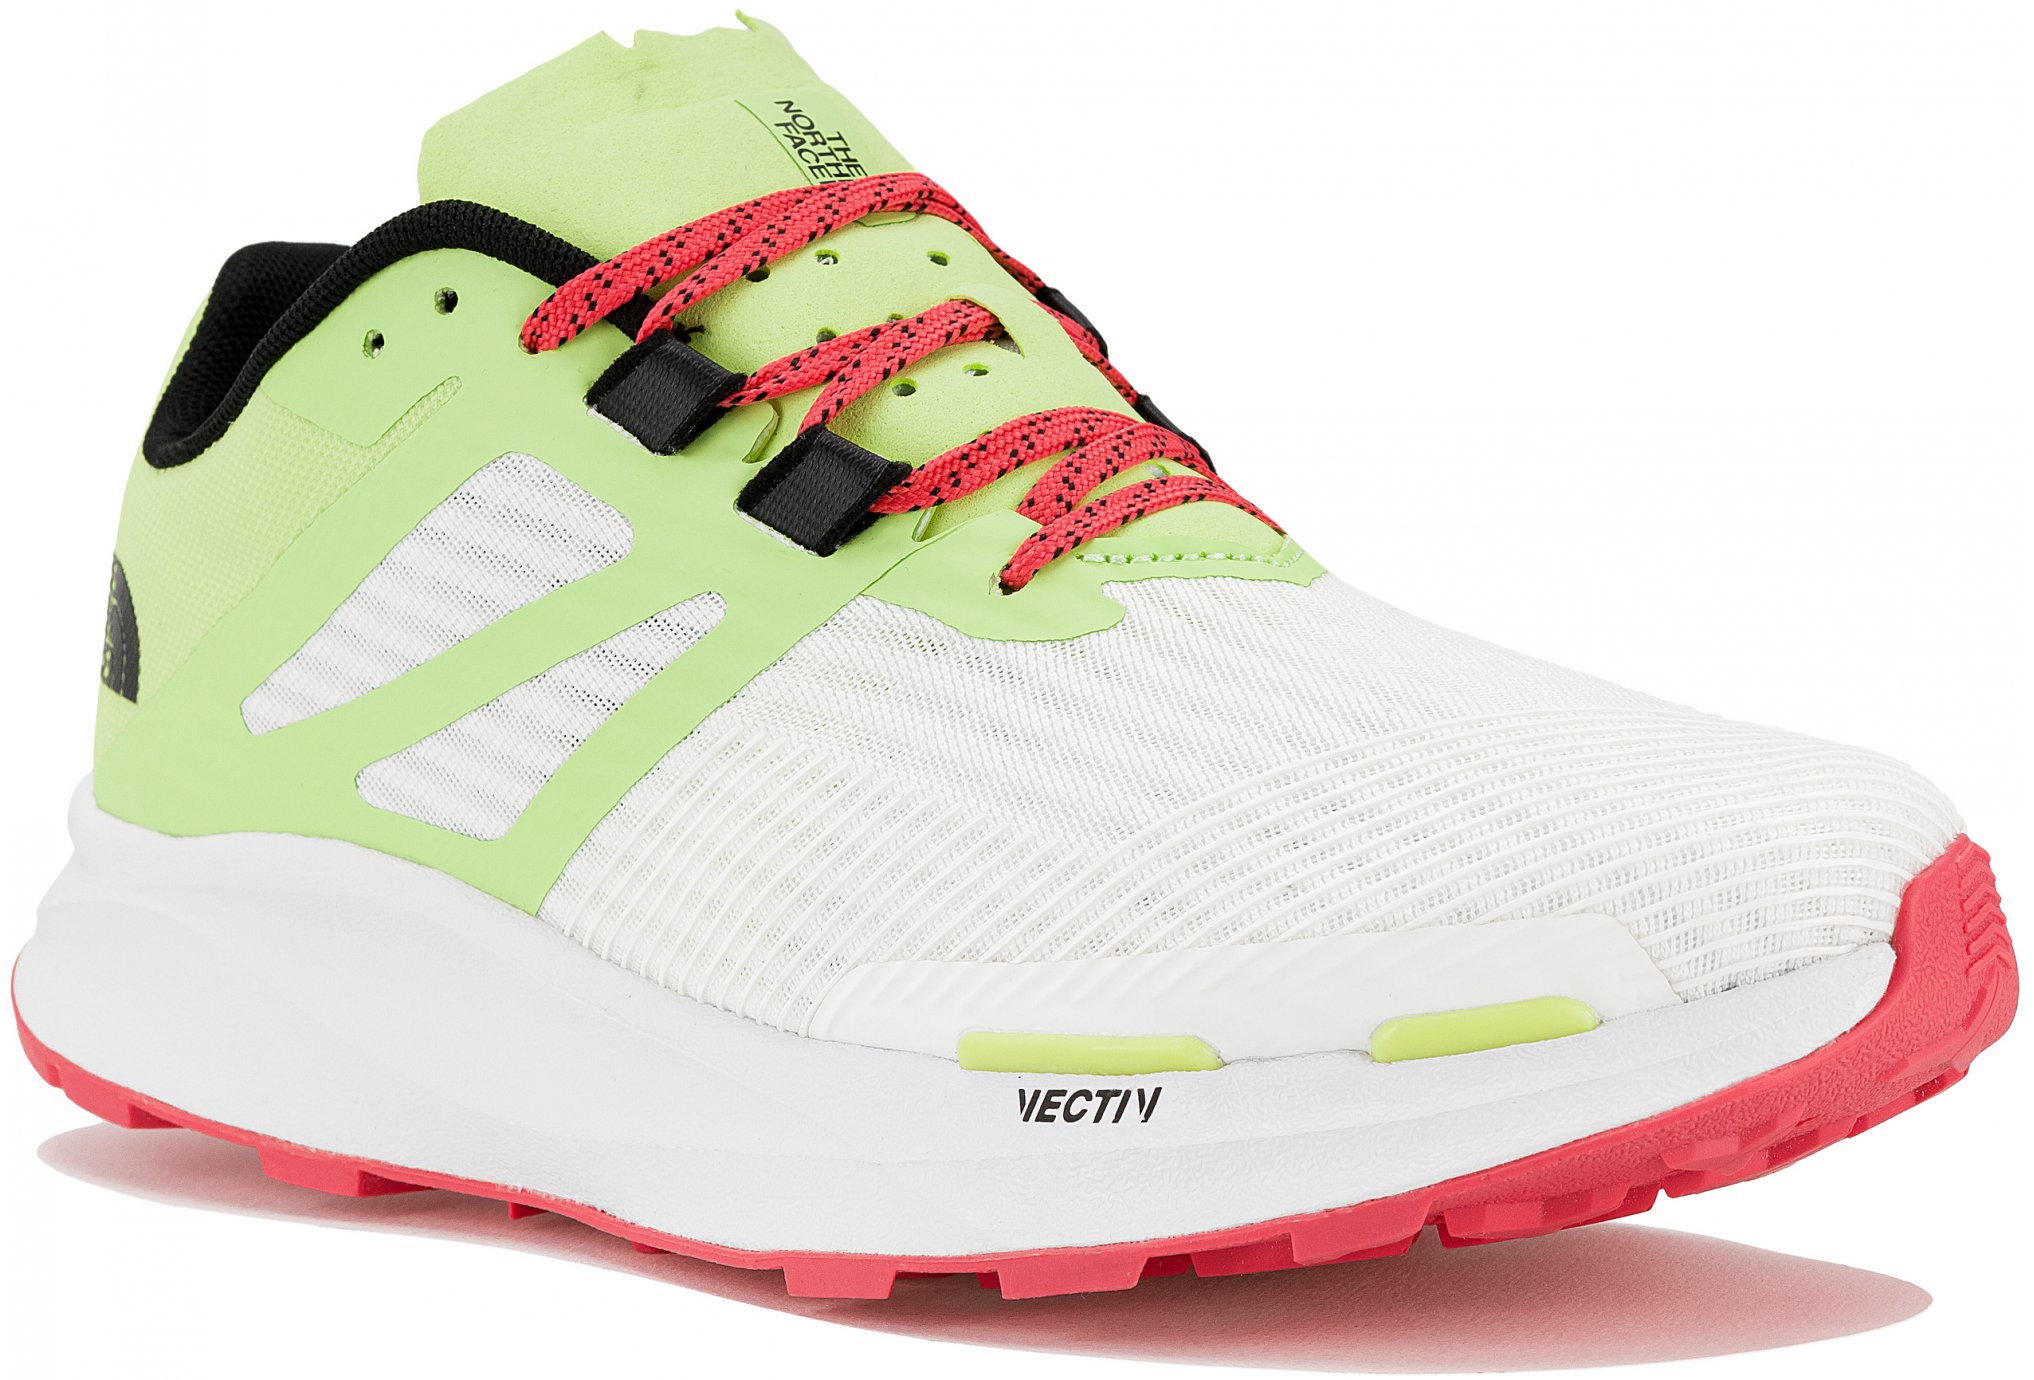 The North Face Vectiv Eminus W Chaussures running femme